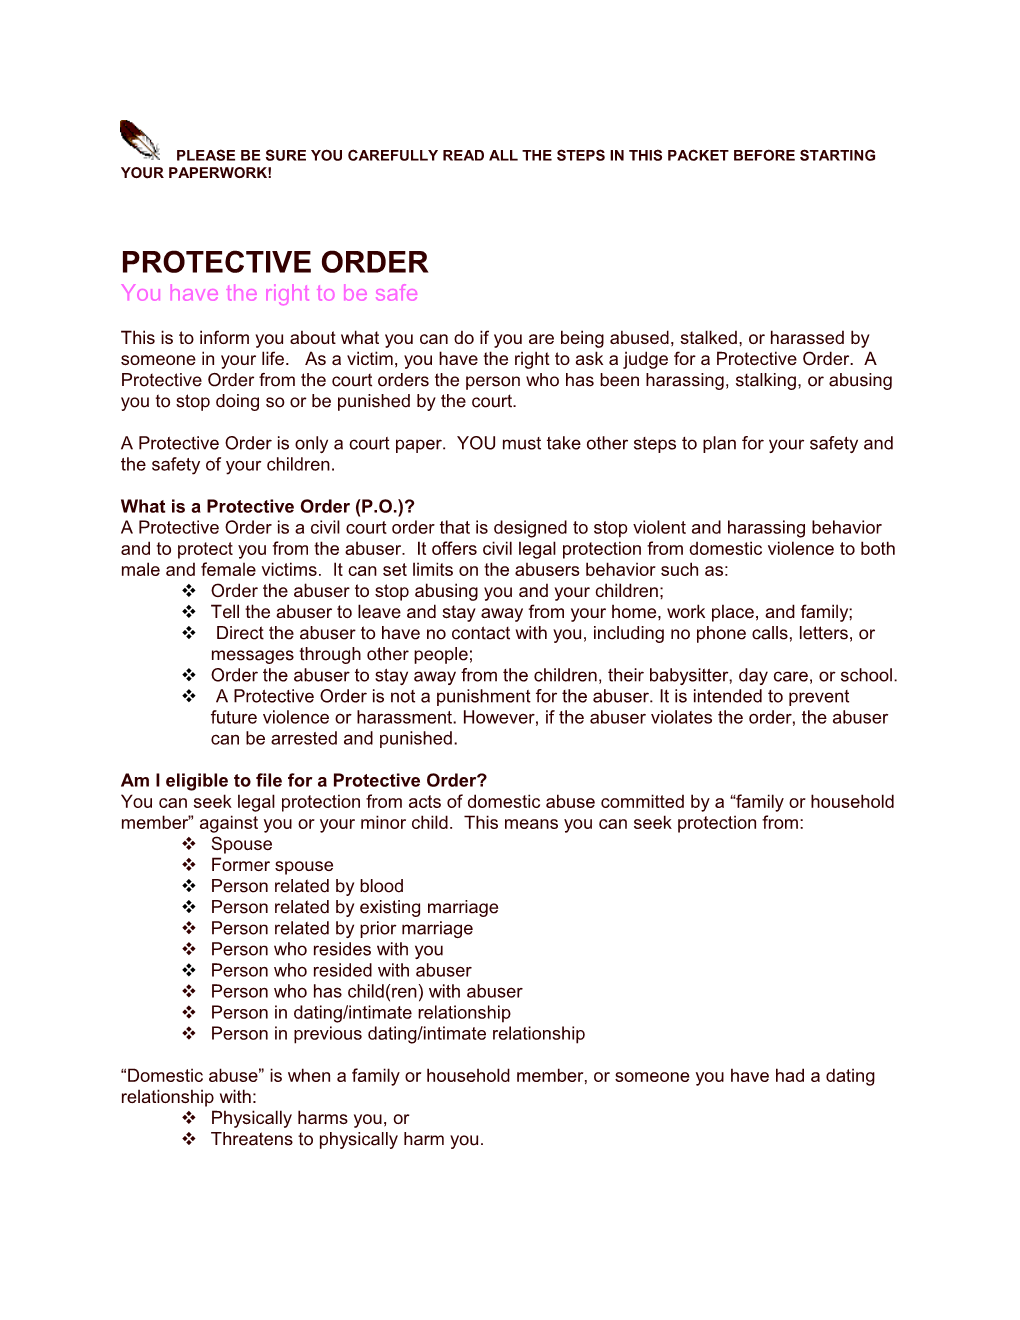 Protective Order